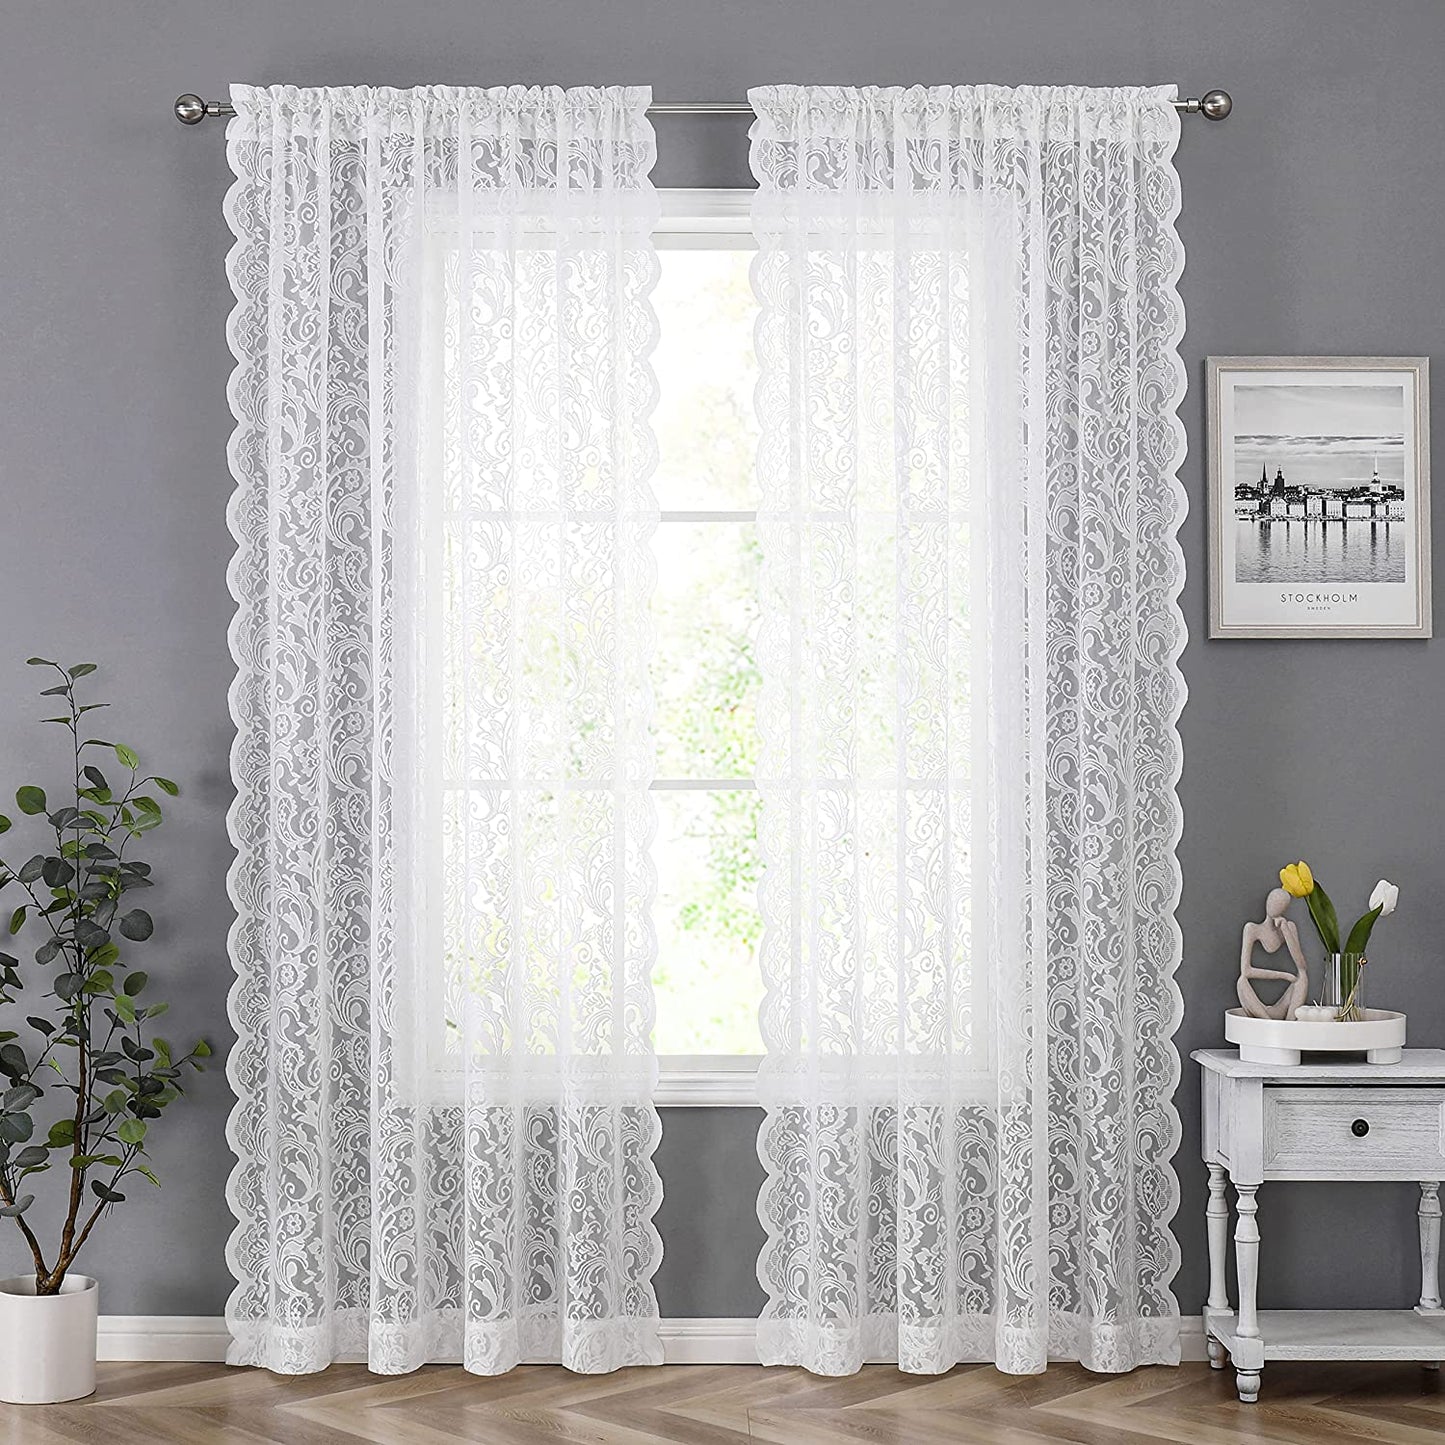 Black Sheer Lace Curtains 84 Inch Vintage Floral Sheer Gothic Curtain Panels for Living Room Bedroom Luxury Light Filtering Drapes Black Window Treatment Sets Rod Pocket 2 Panels 54" Wx84 L  Bujasso Rod Pocket White 54"X95"X2 